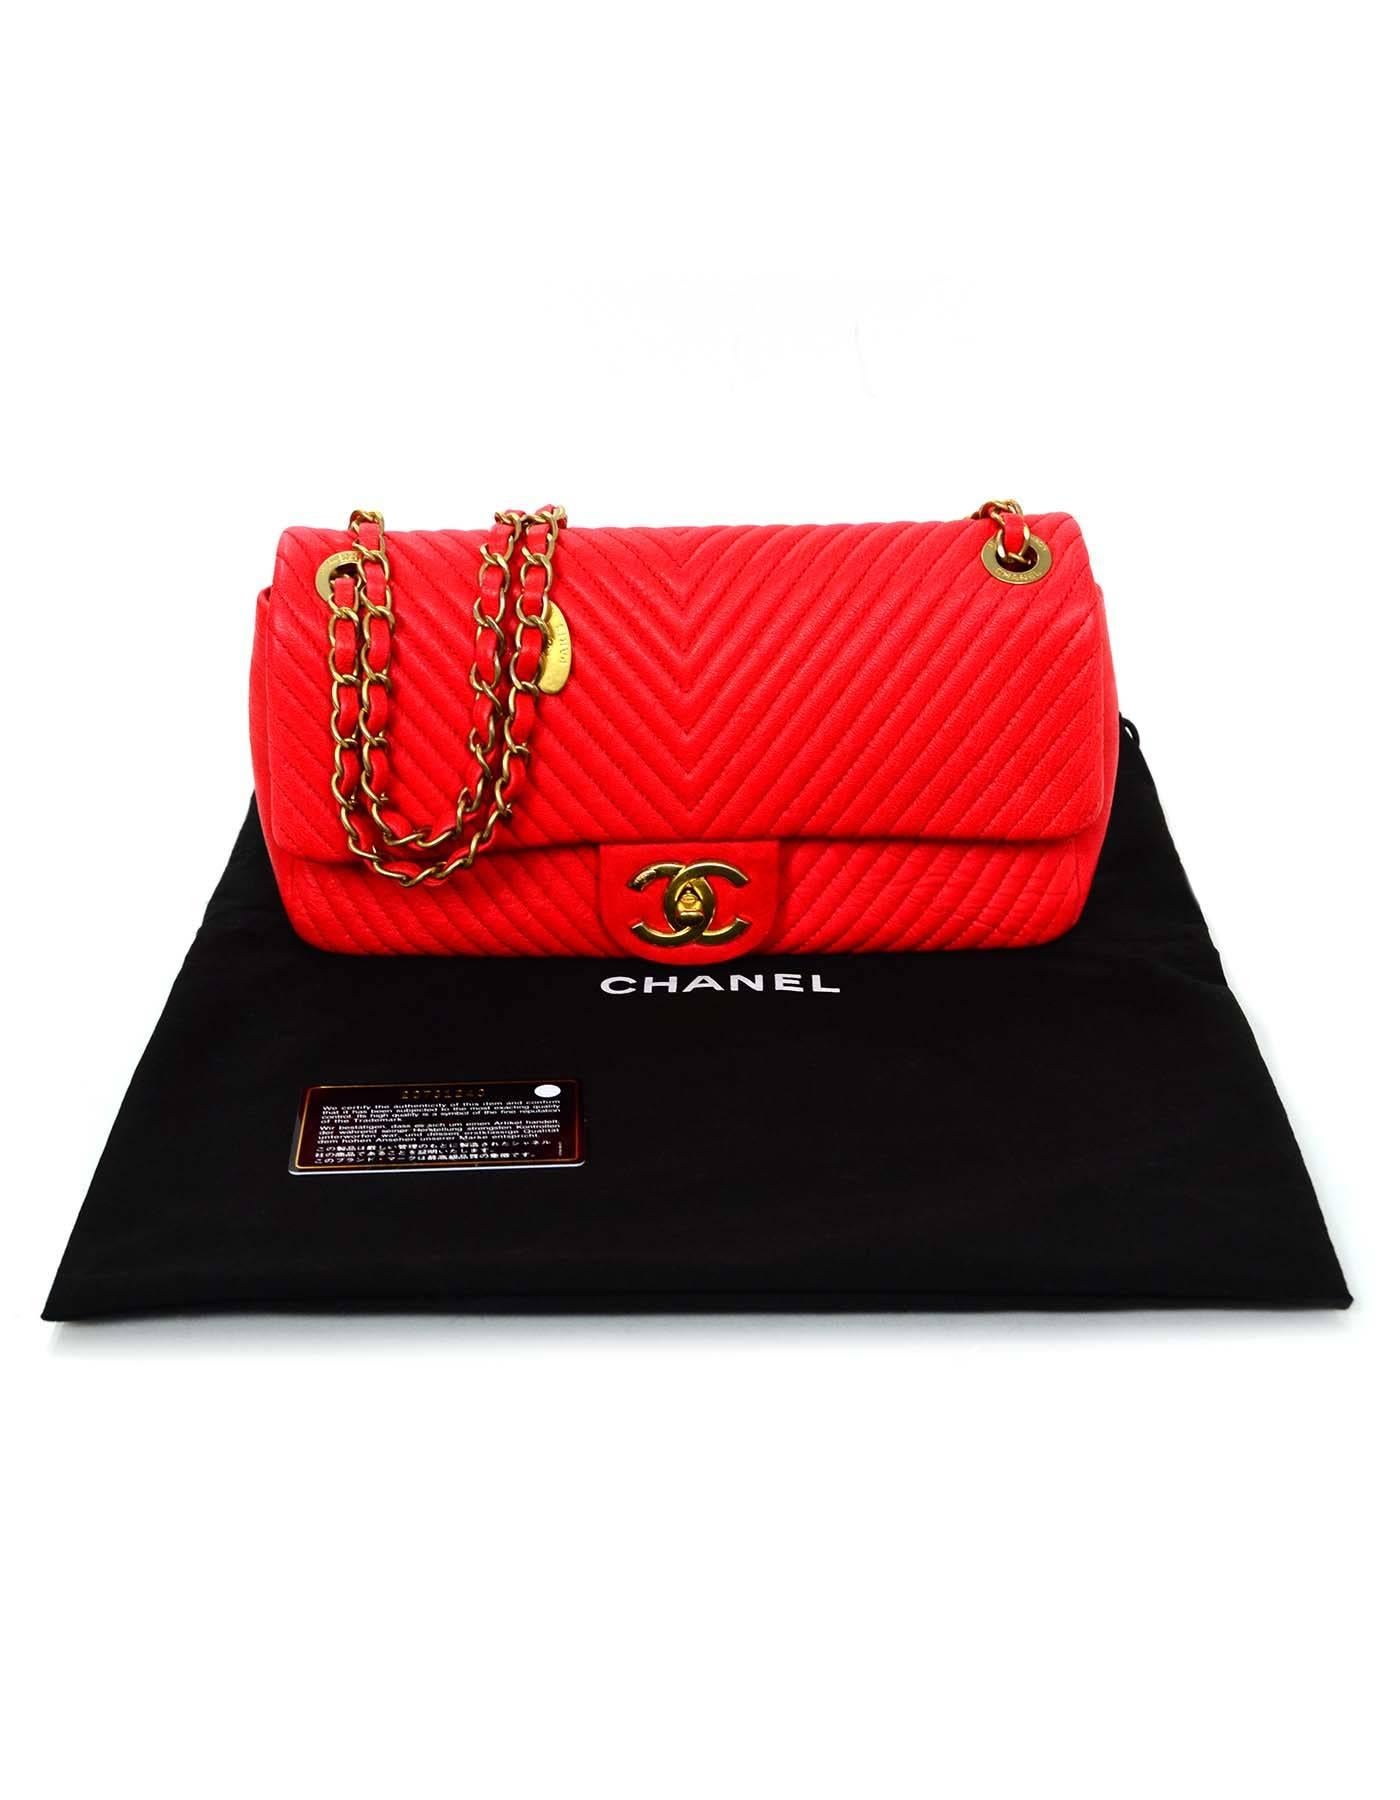 Chanel Coral Wrinkled Chevron Leather Flap Bag 6